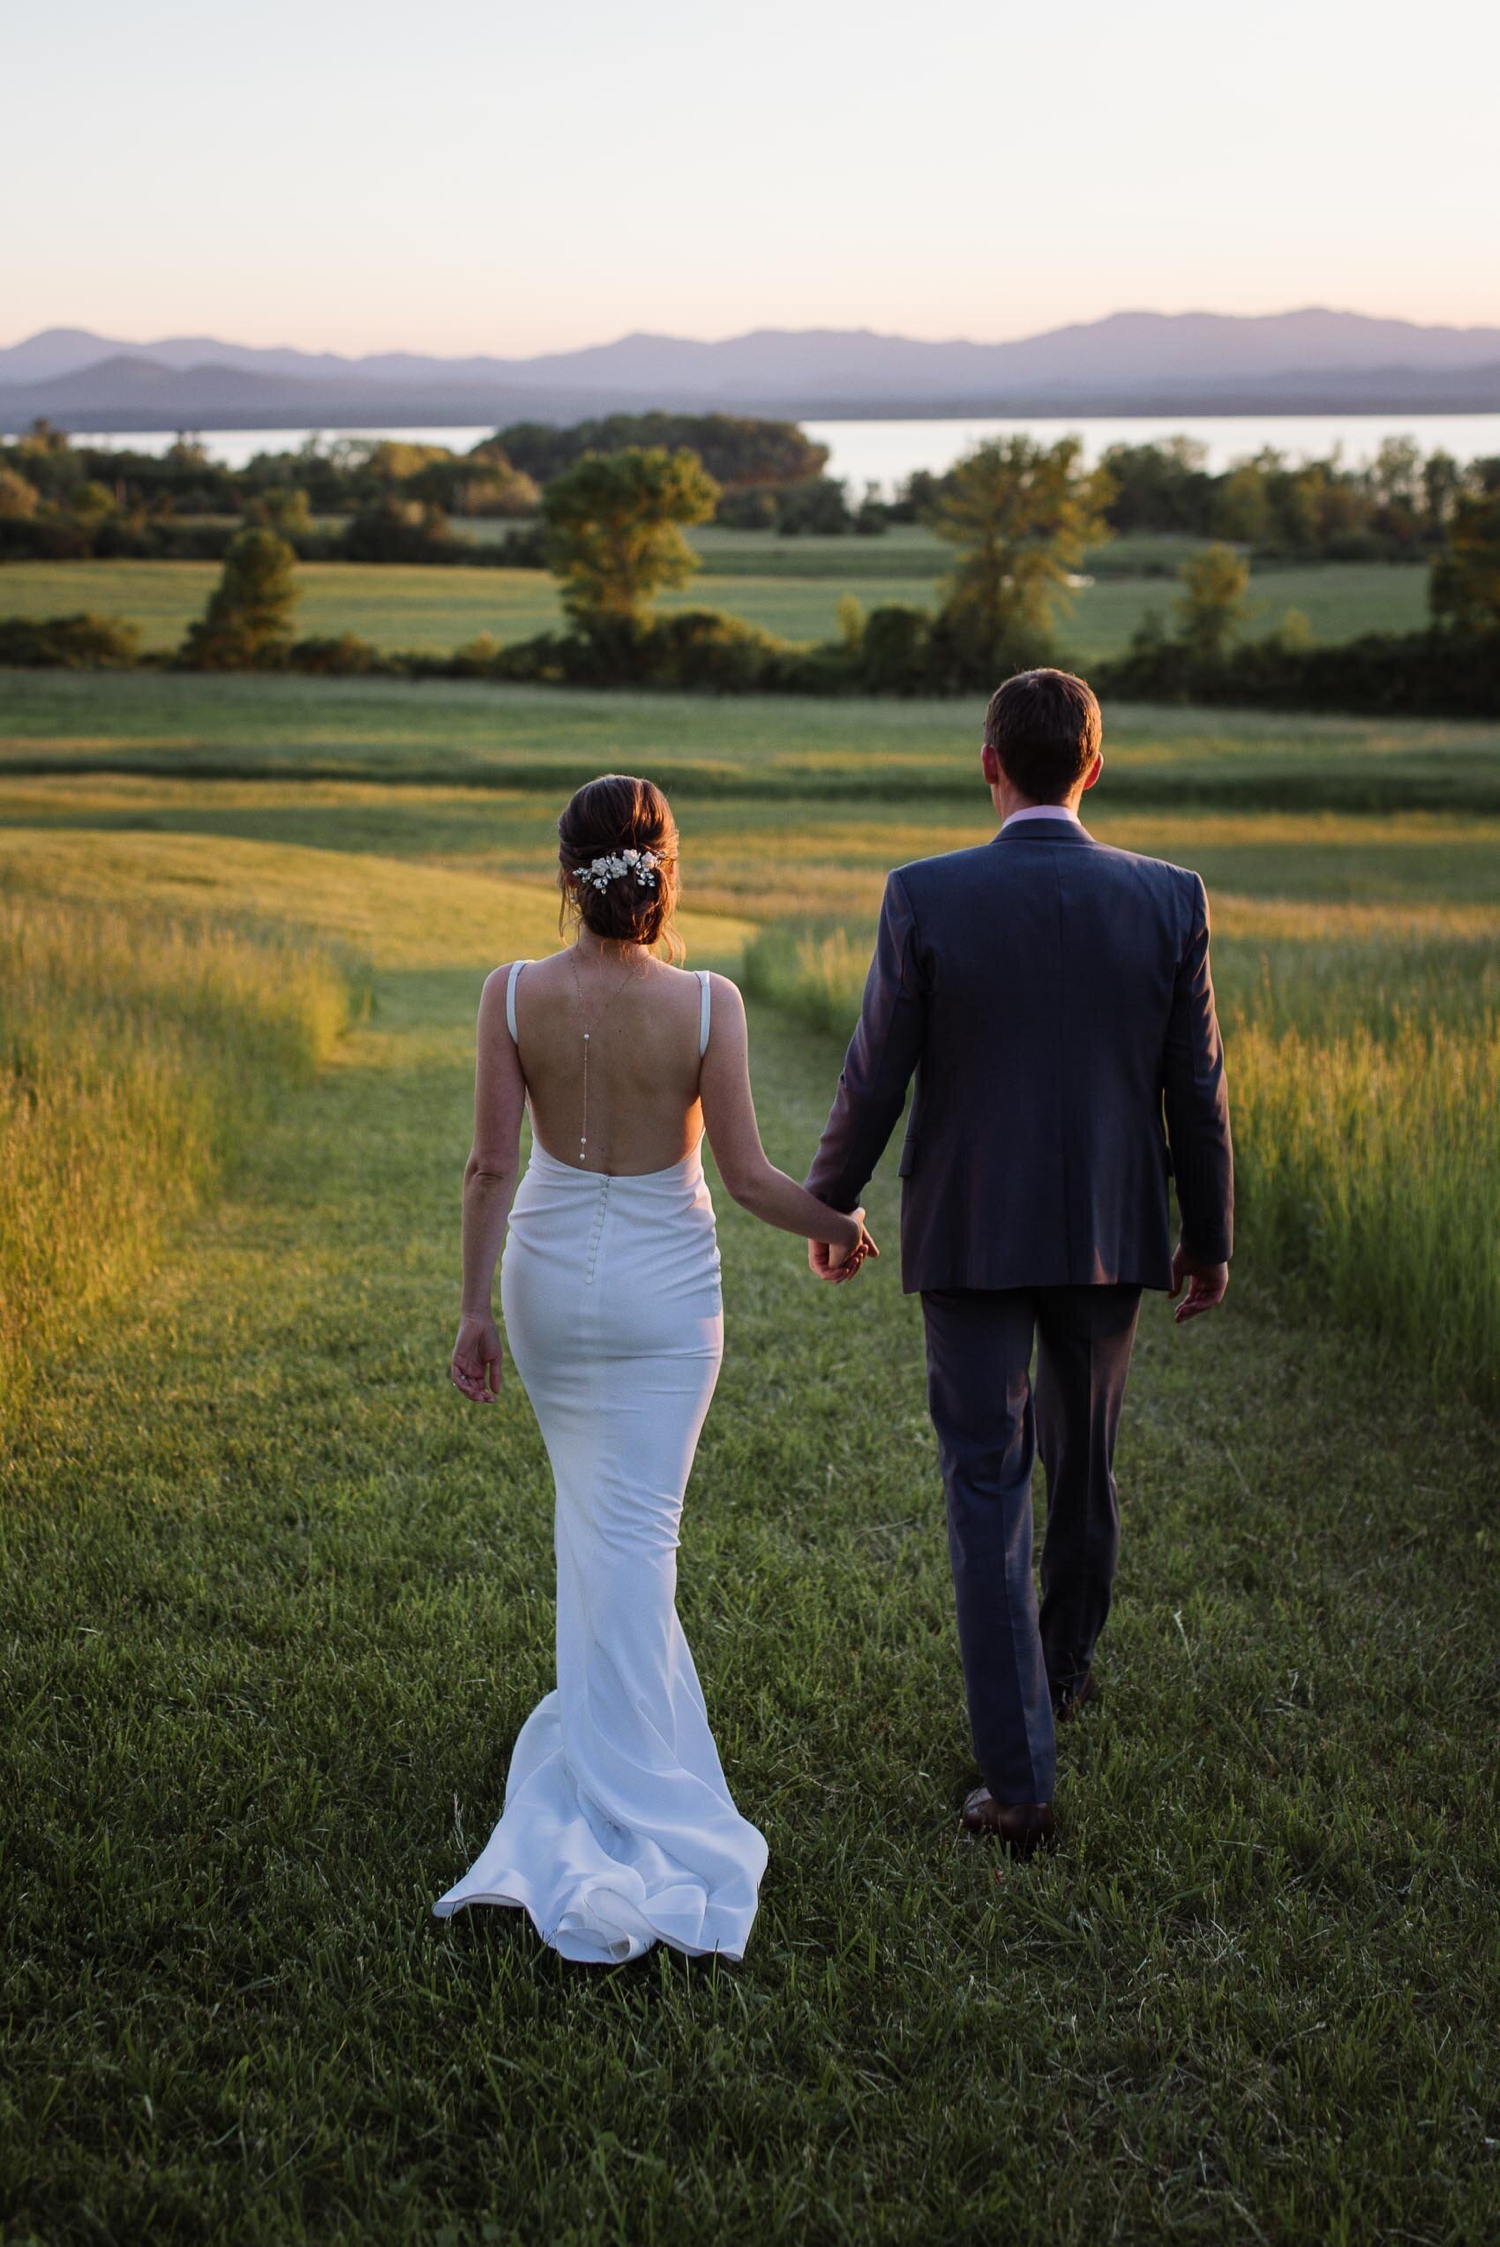 elegant Summer wedding in new england town of Shelburne, Vermont with views of mountains at sunset